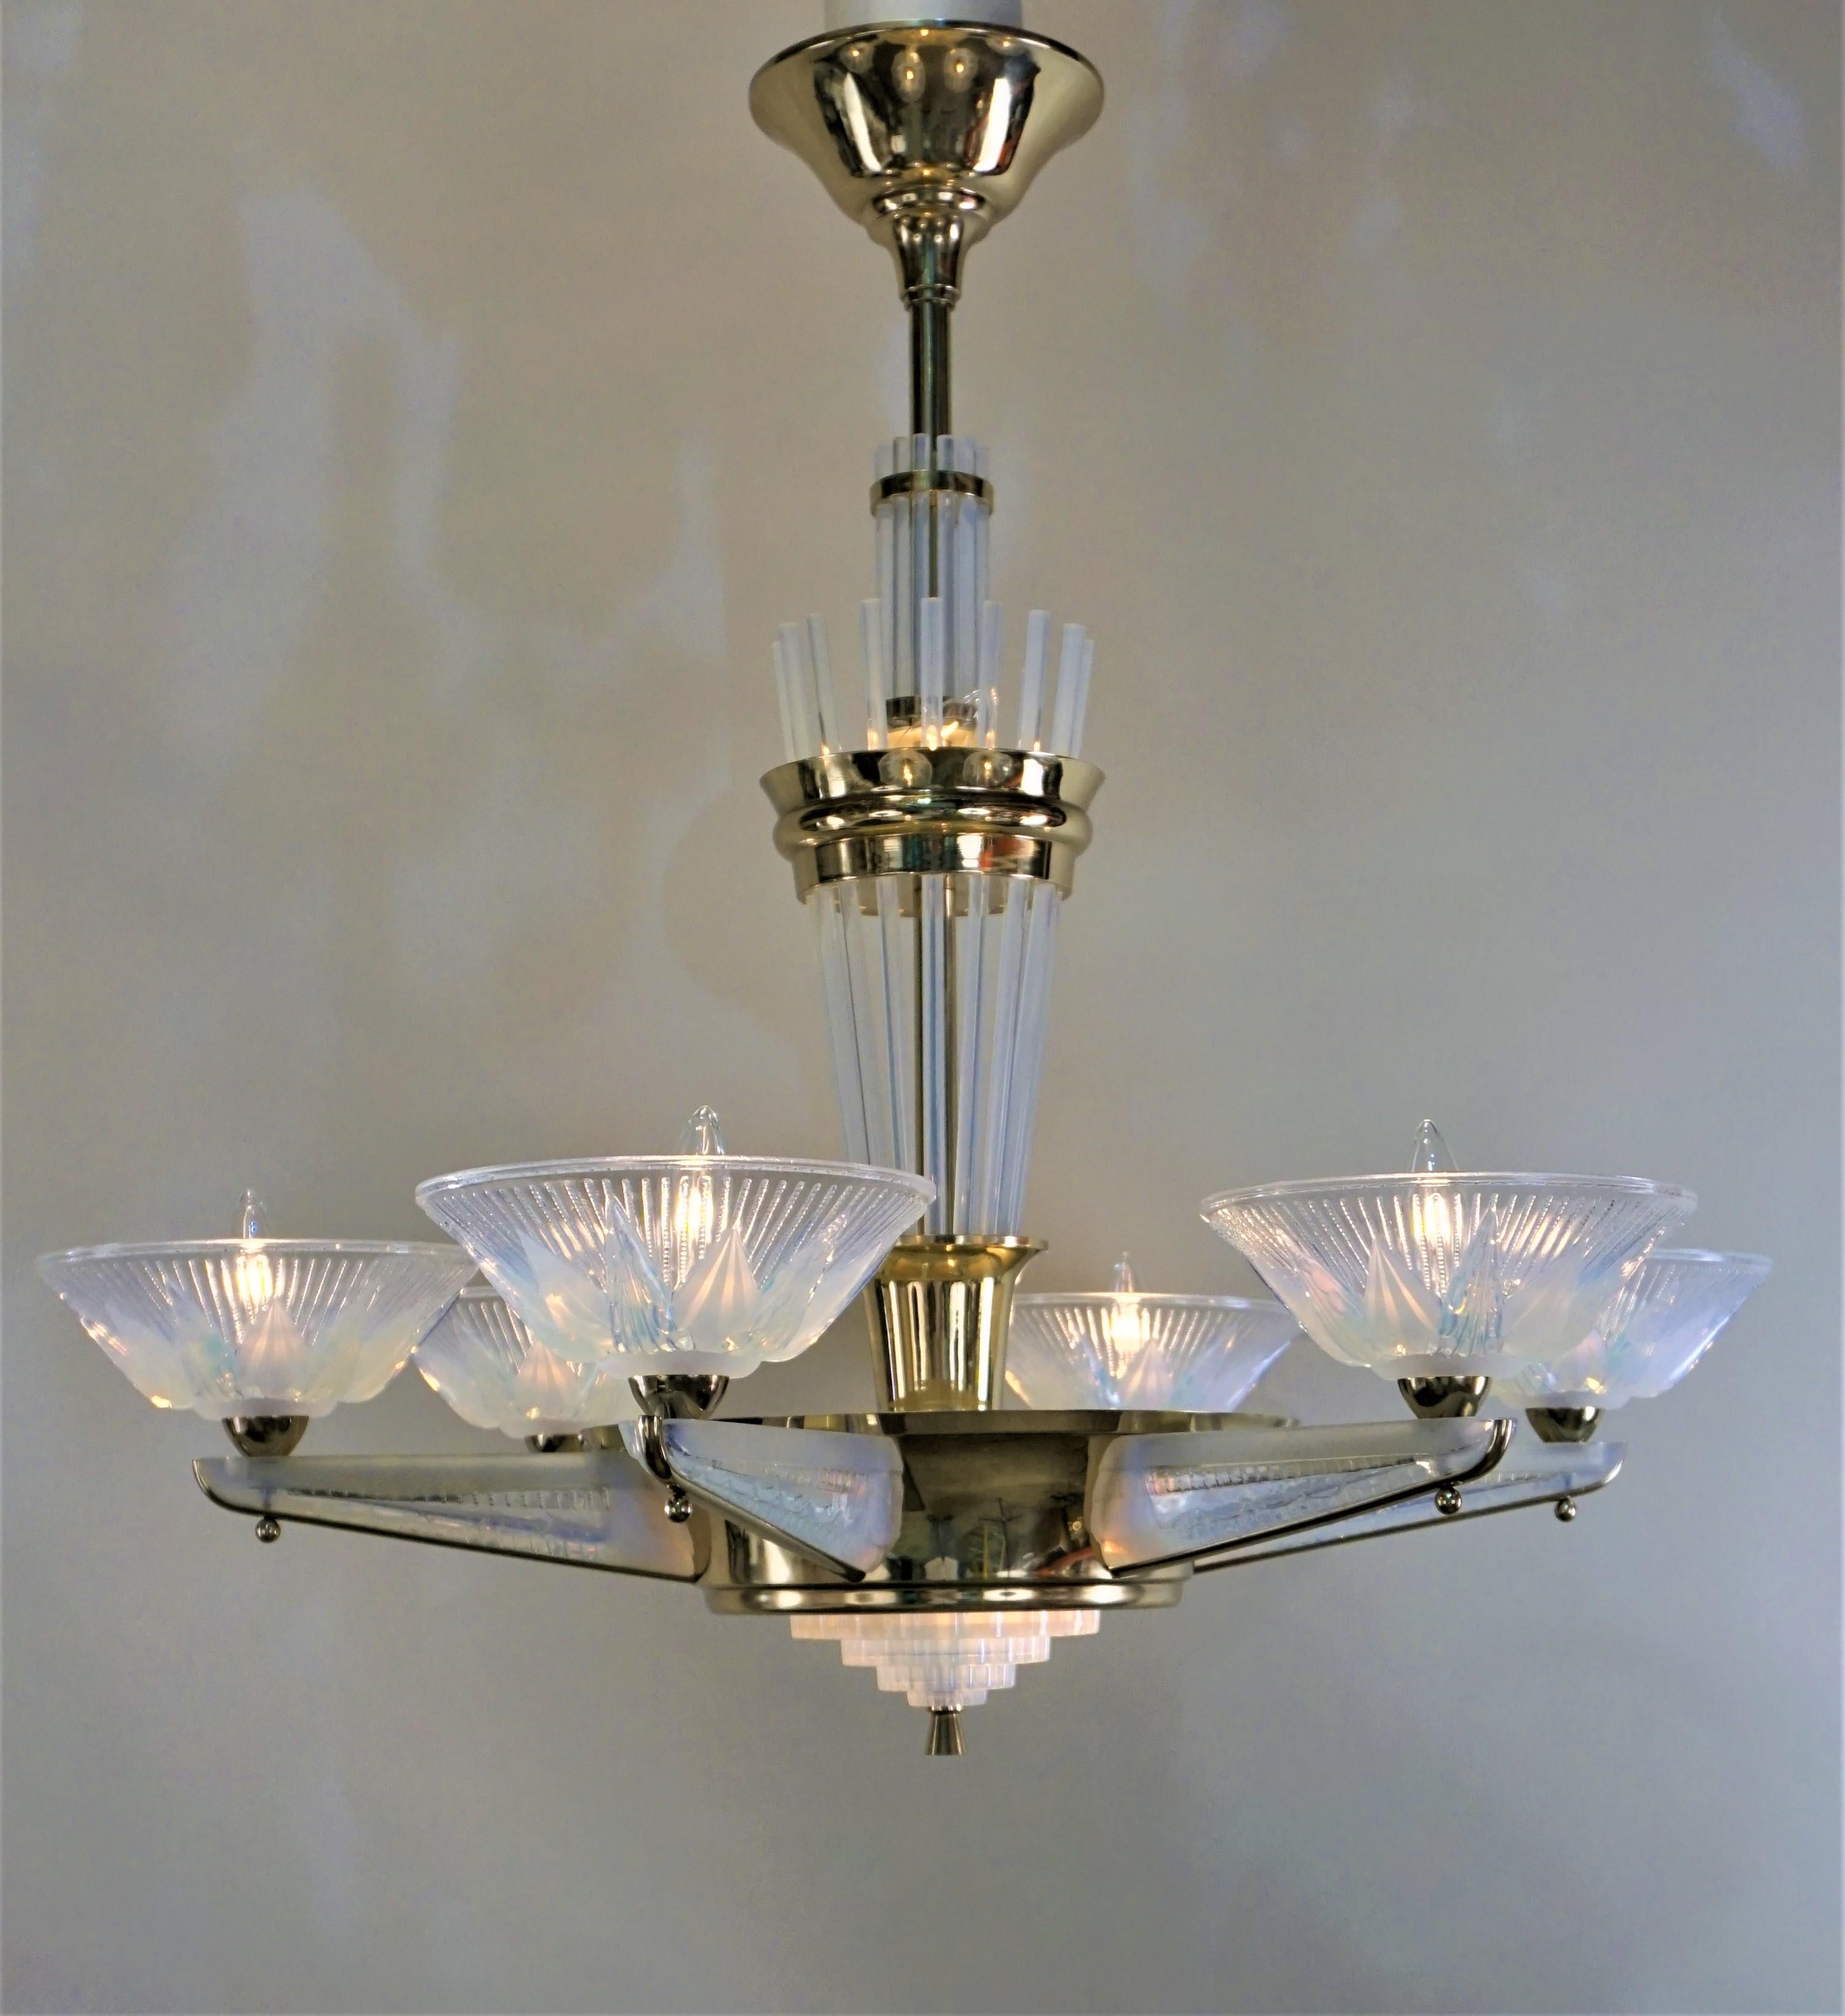 A stunning French polished bronze Art Deco six-arm chandeliers with opalescent glass arms and shades even the centre column adorned with opalescent glass. These chandelier has total of nine lights.